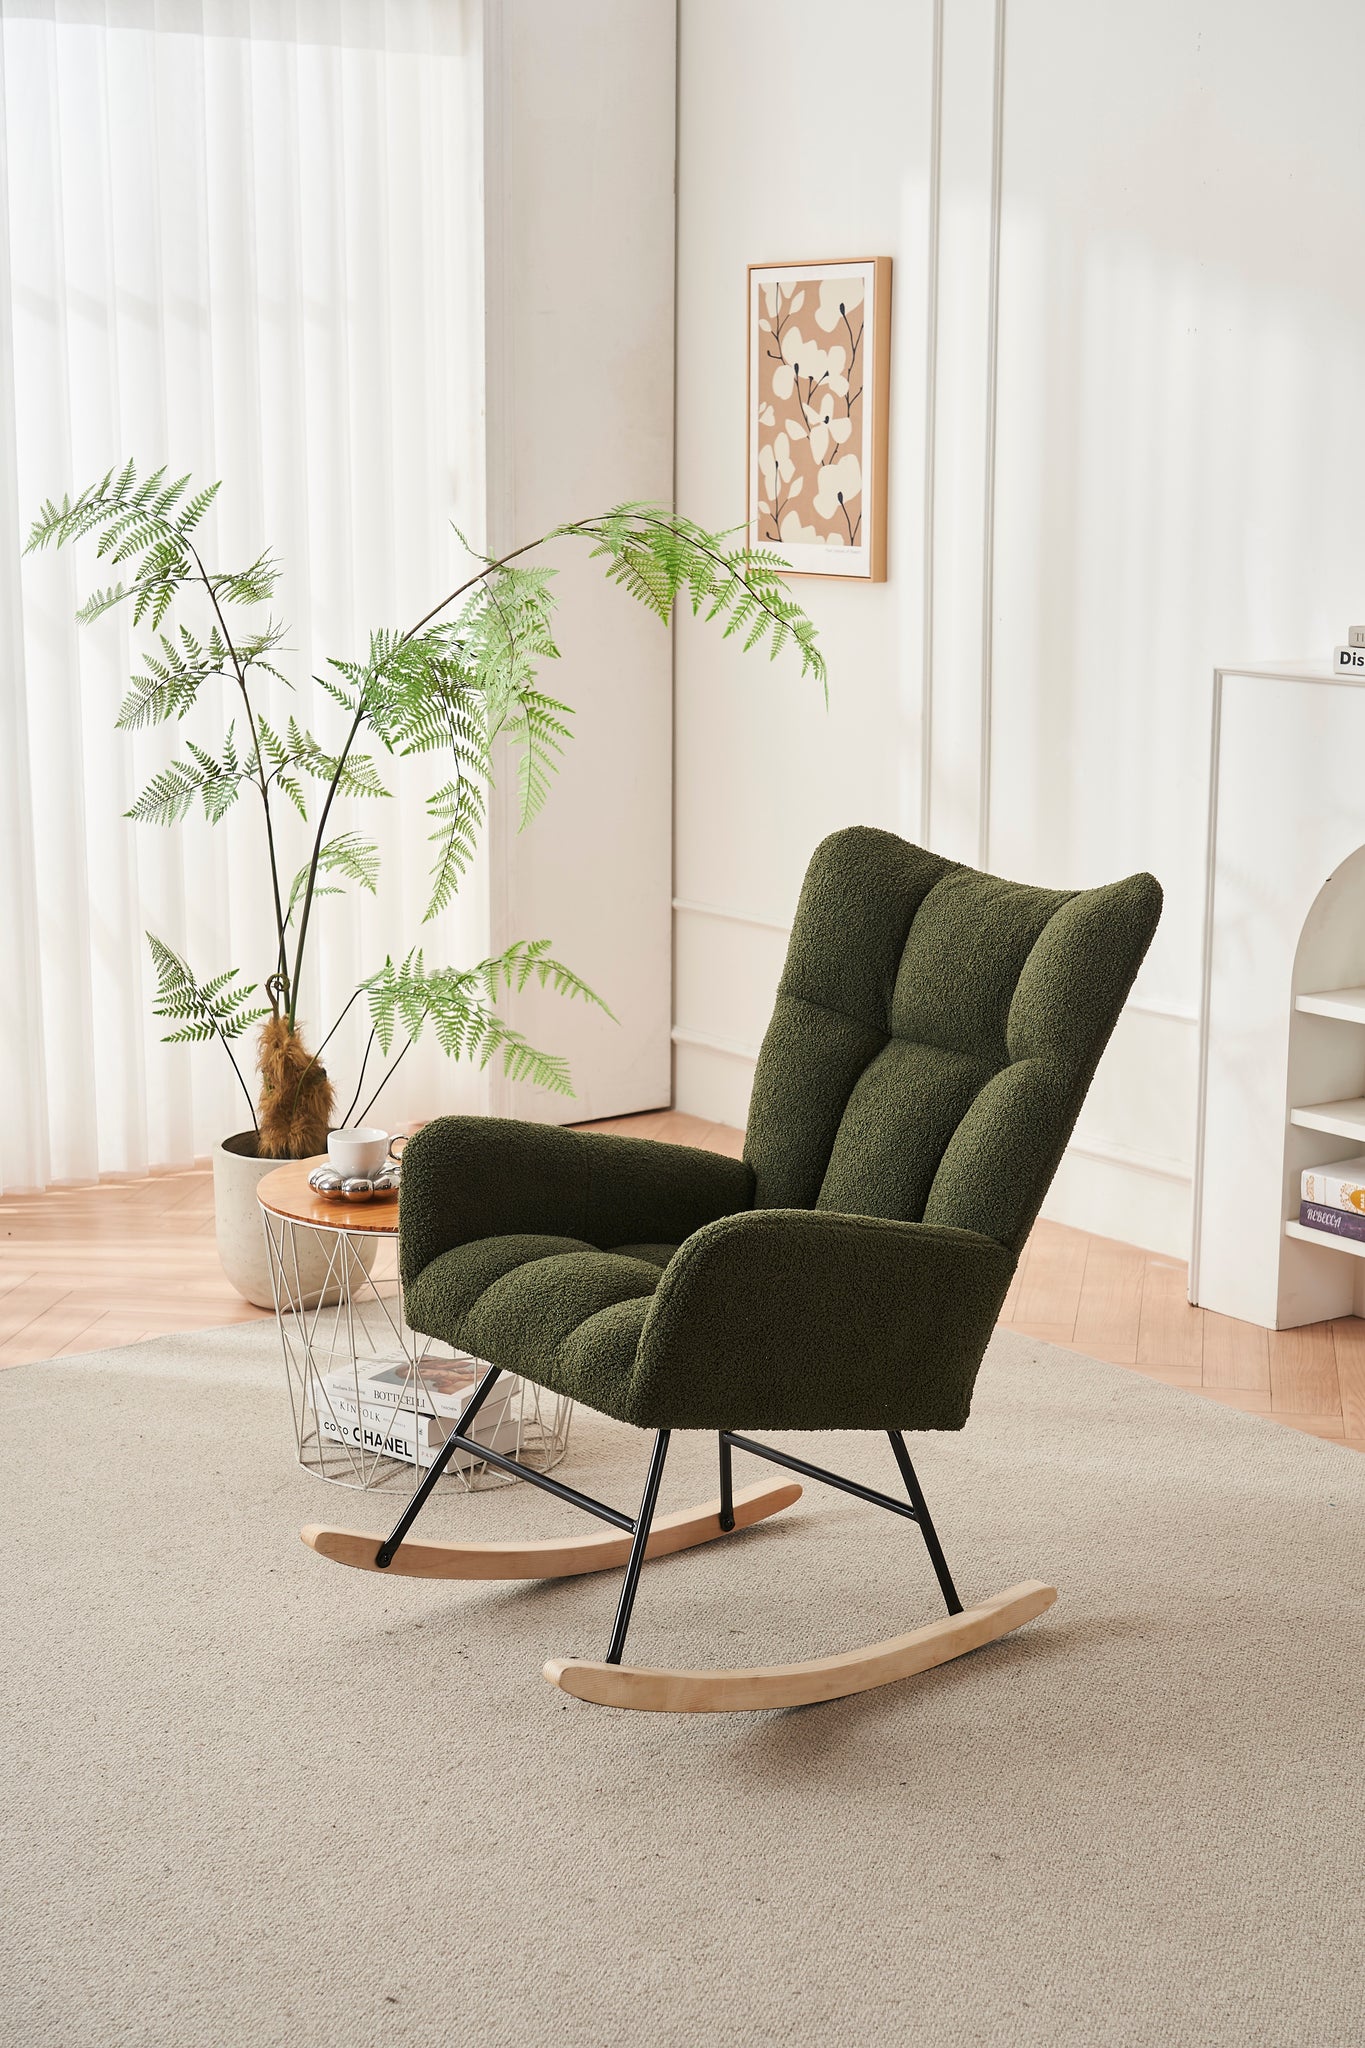 Rocking Chair Nursery, Solid Wood Legs Reading Chair green-primary living space-modern-rocking